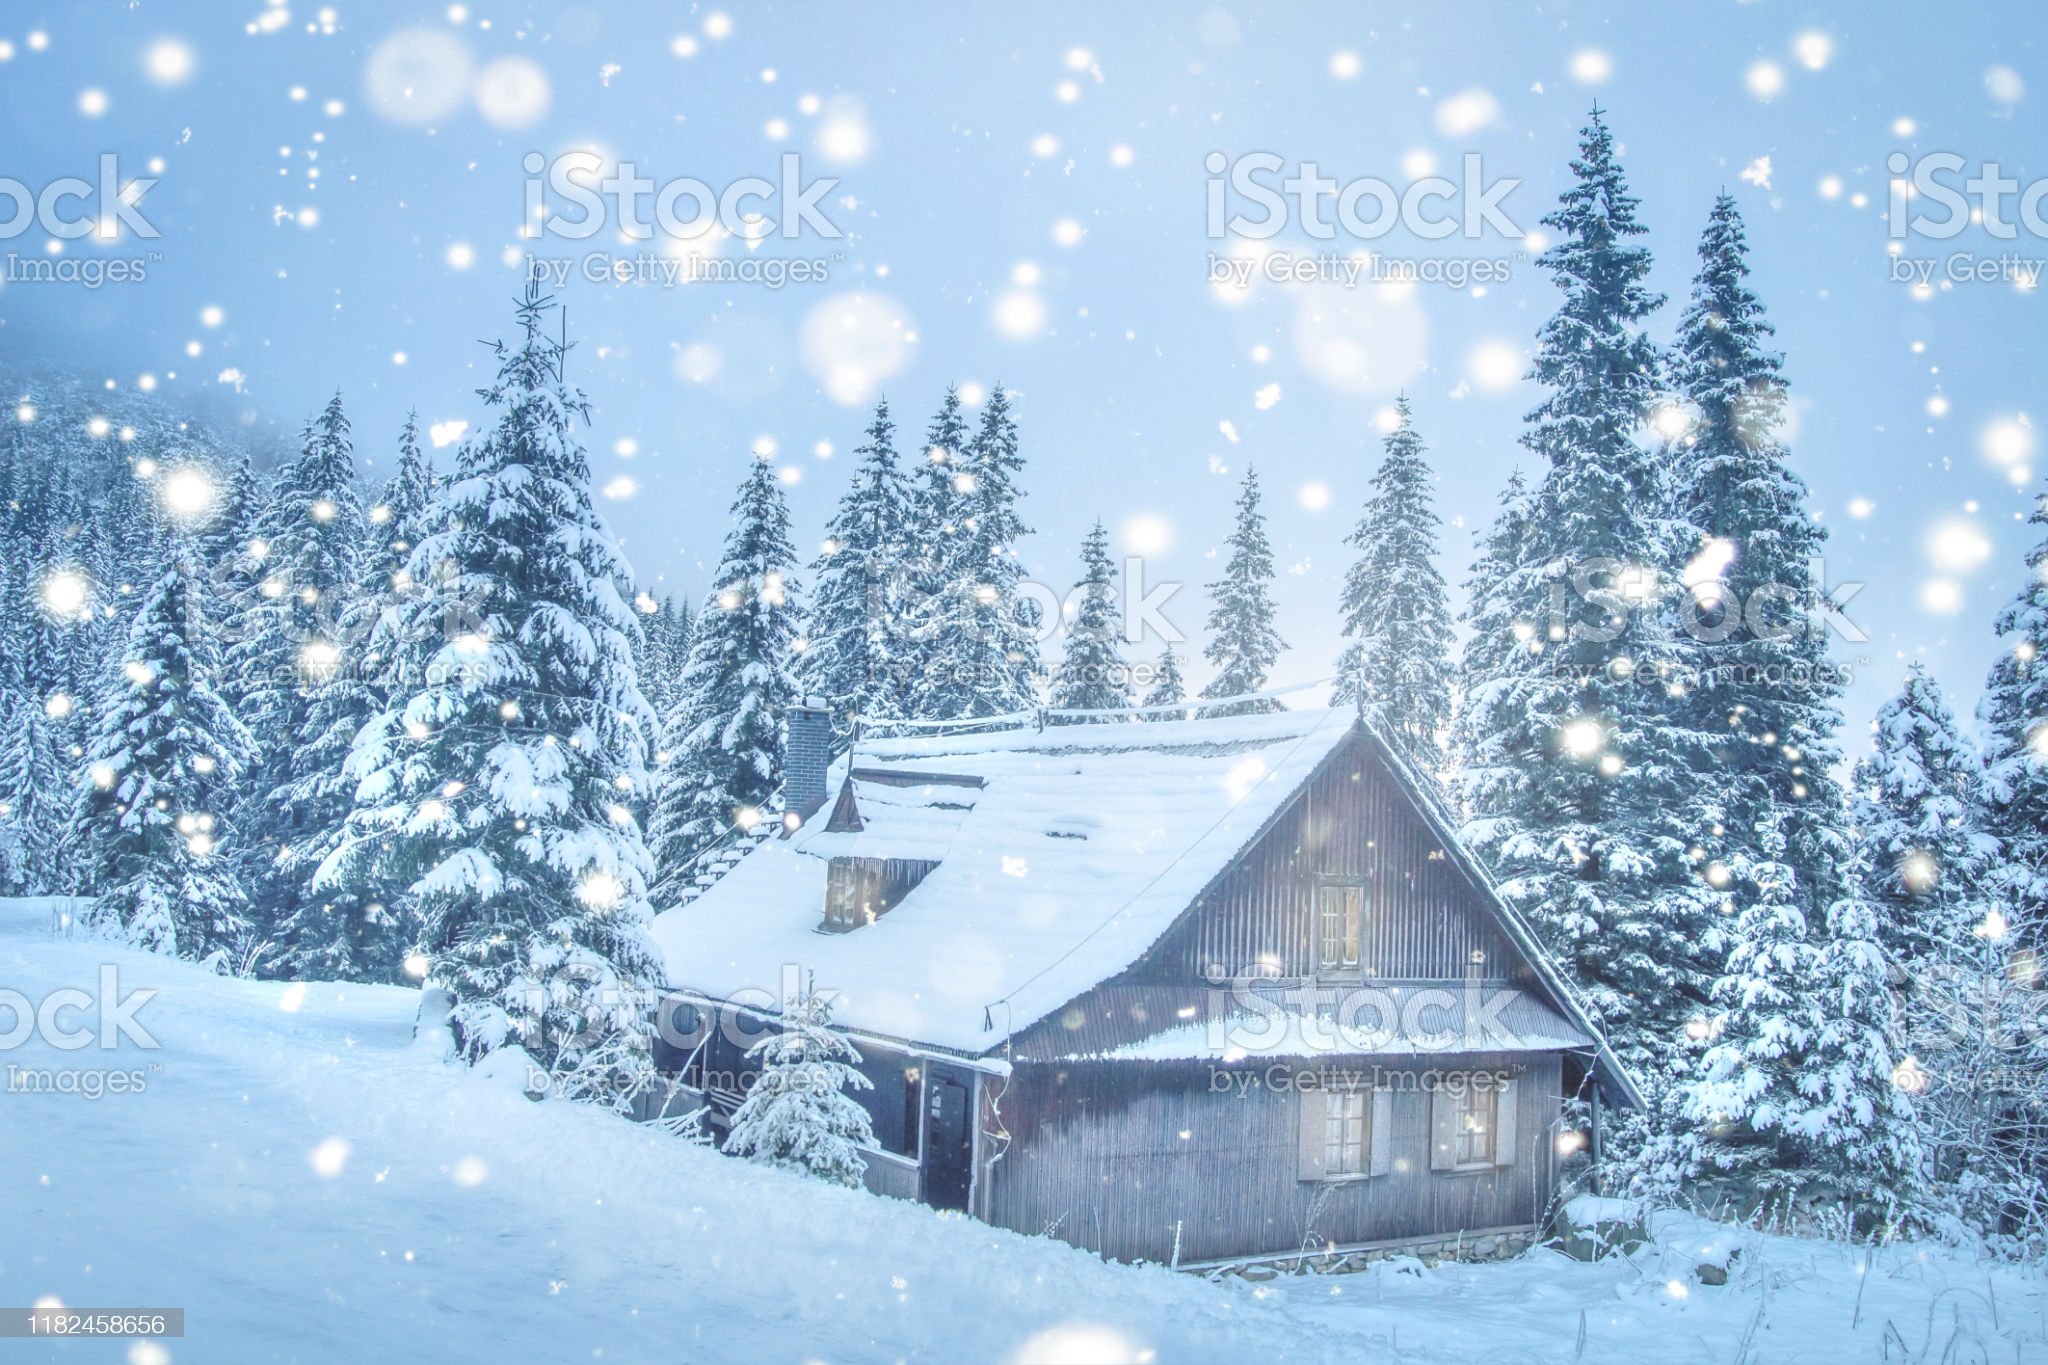 Christmas Background Winter Scene With Cozy Wooden House In Mountains In Snowfall Xmas Scene Winter Landscape Image Now